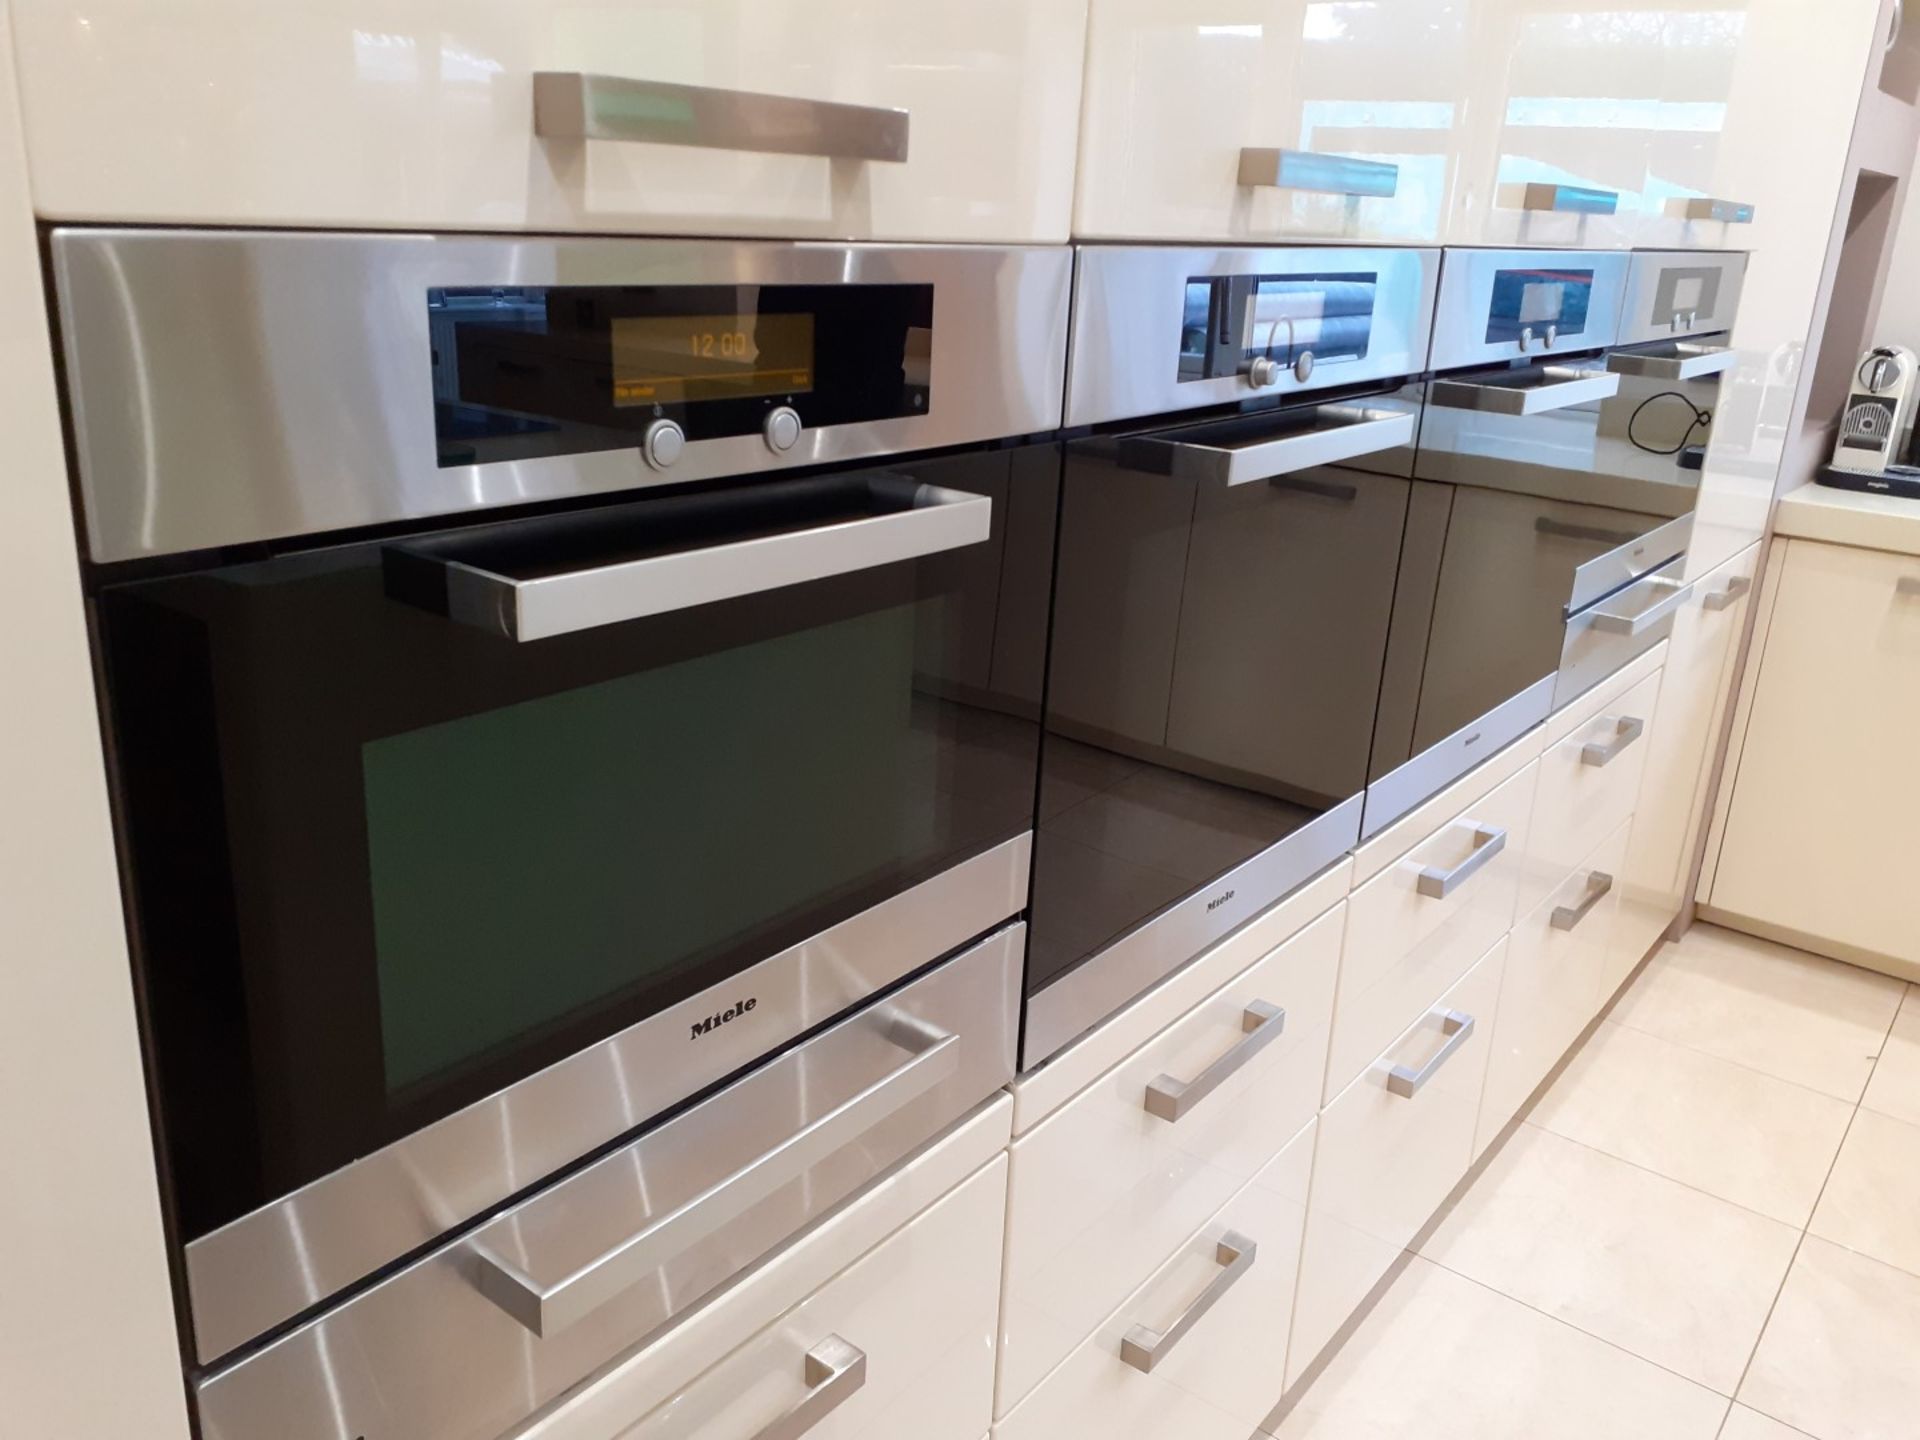 1 x ALNO Fitted Gloss White Kitchen With Integrated Miele Appliances, Silestone Worktops And A - Image 38 of 86